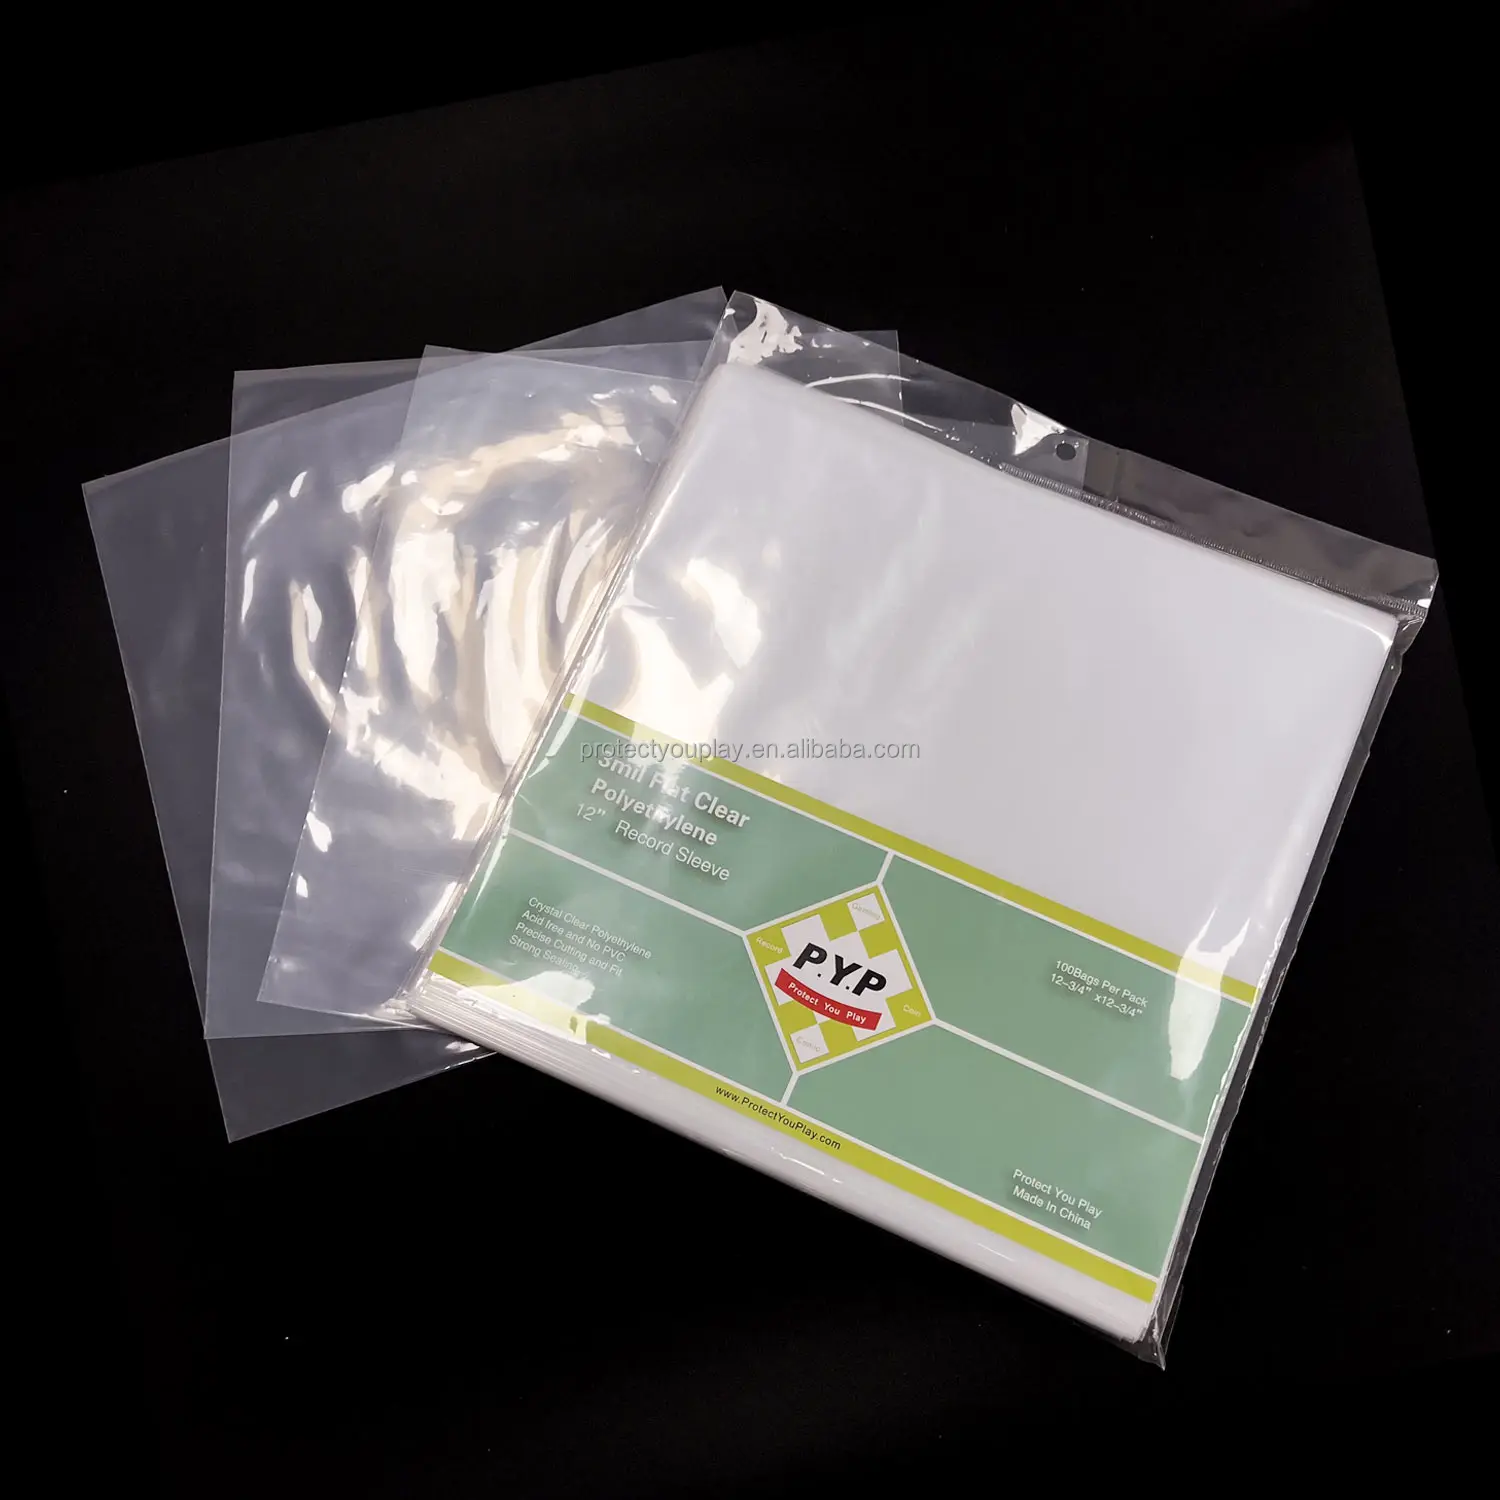 P.Y.P Durable Wrinkle-Free High-Density Polypropylene High Clear Vinyl Record Outer Sleeves